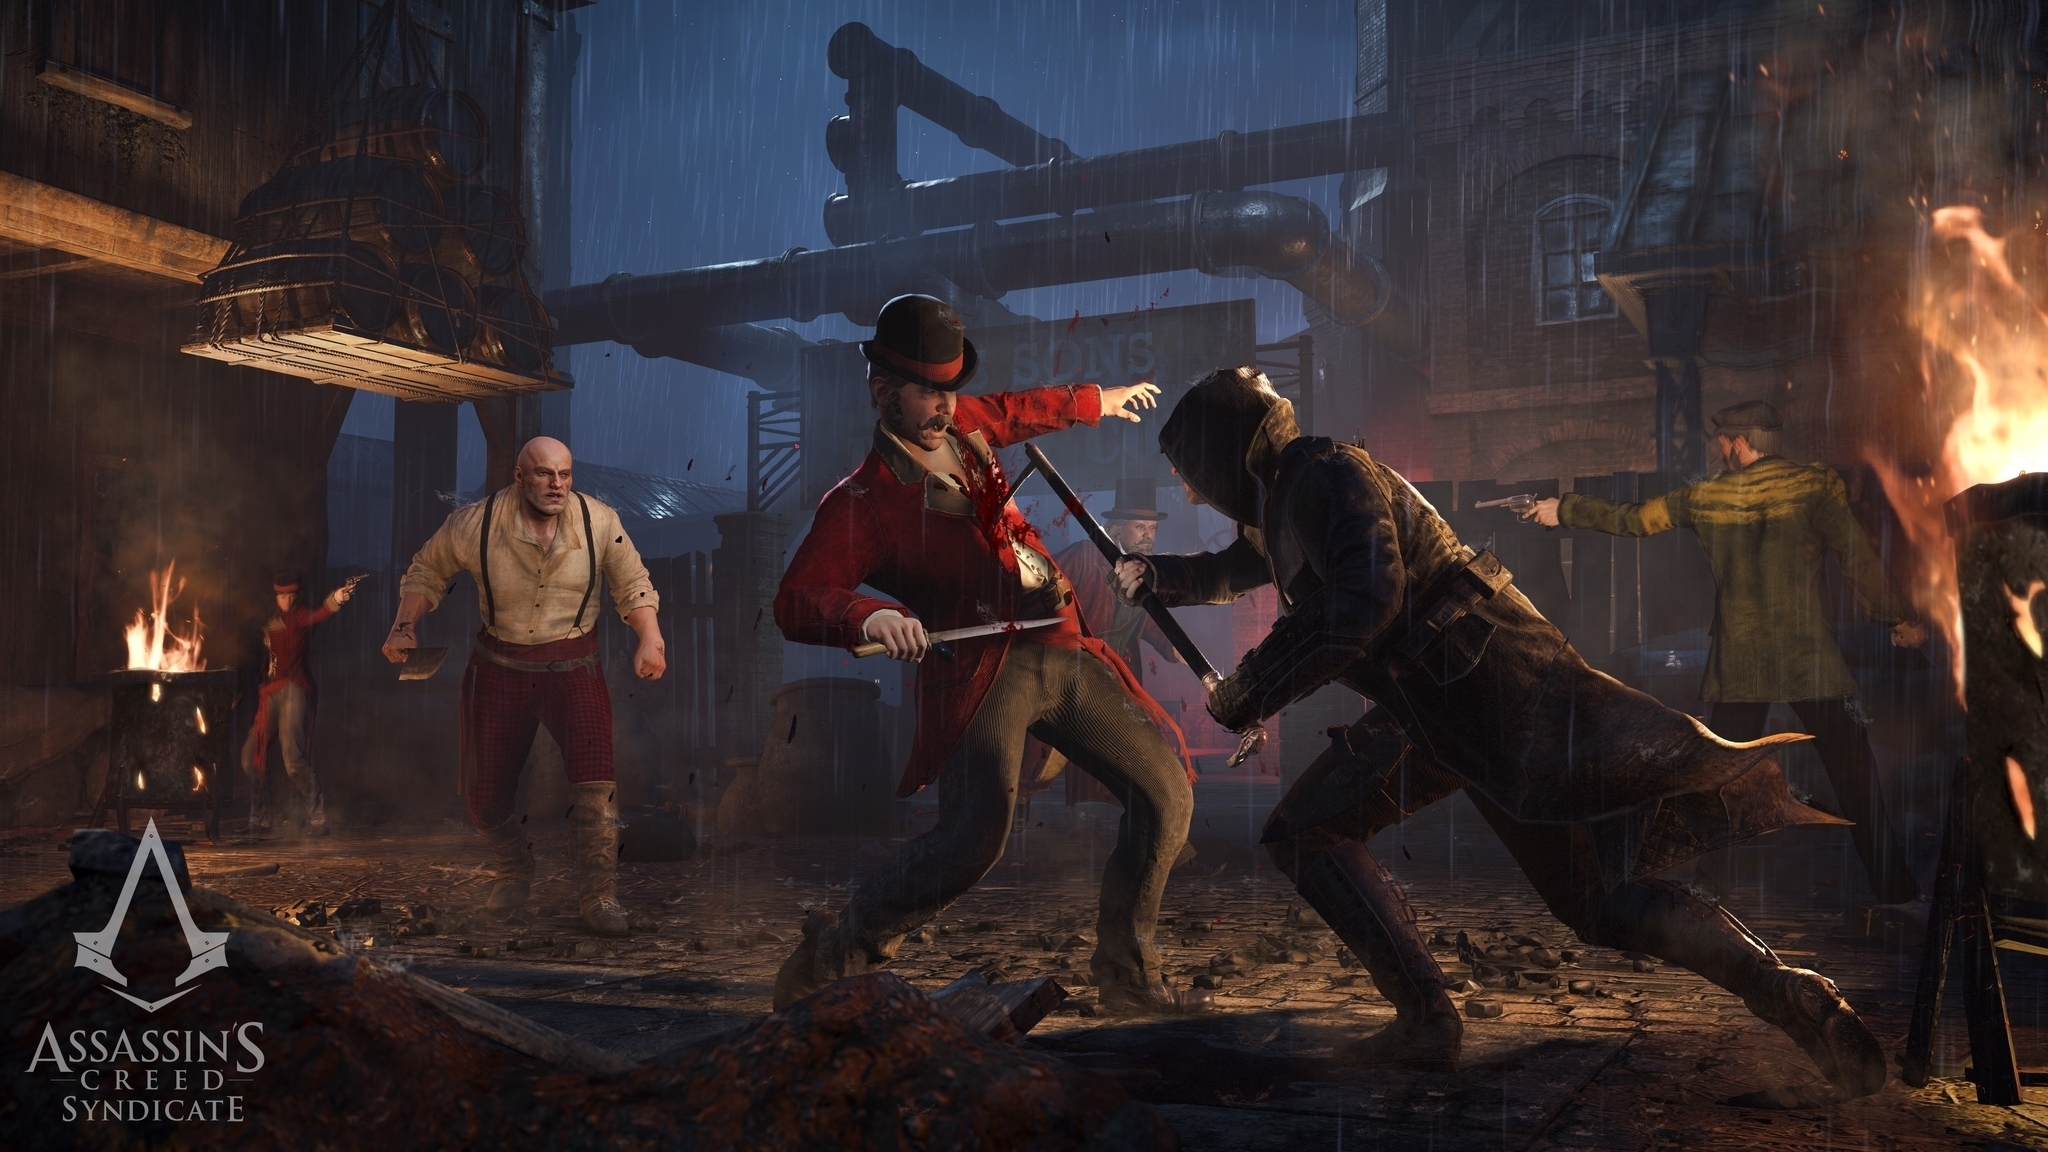      Assassin's Creed: Syndicate